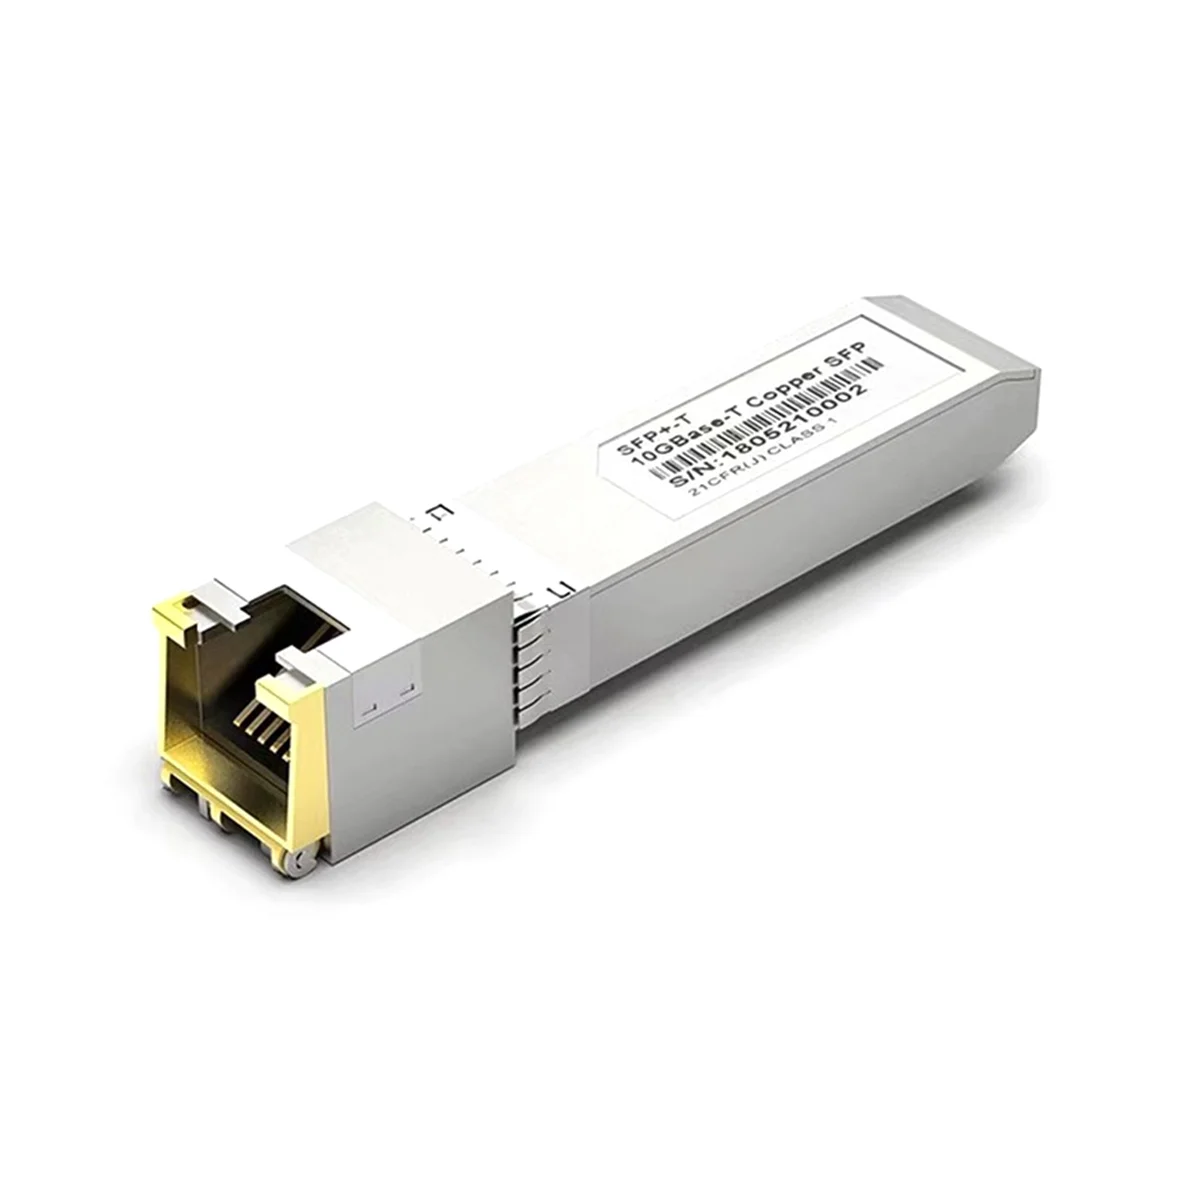 

SFP+ Module RJ45 Switch GBIC 10G Connector SFP Copper Cable SFP 10G Electrical Port Optical Module Ethernet Port